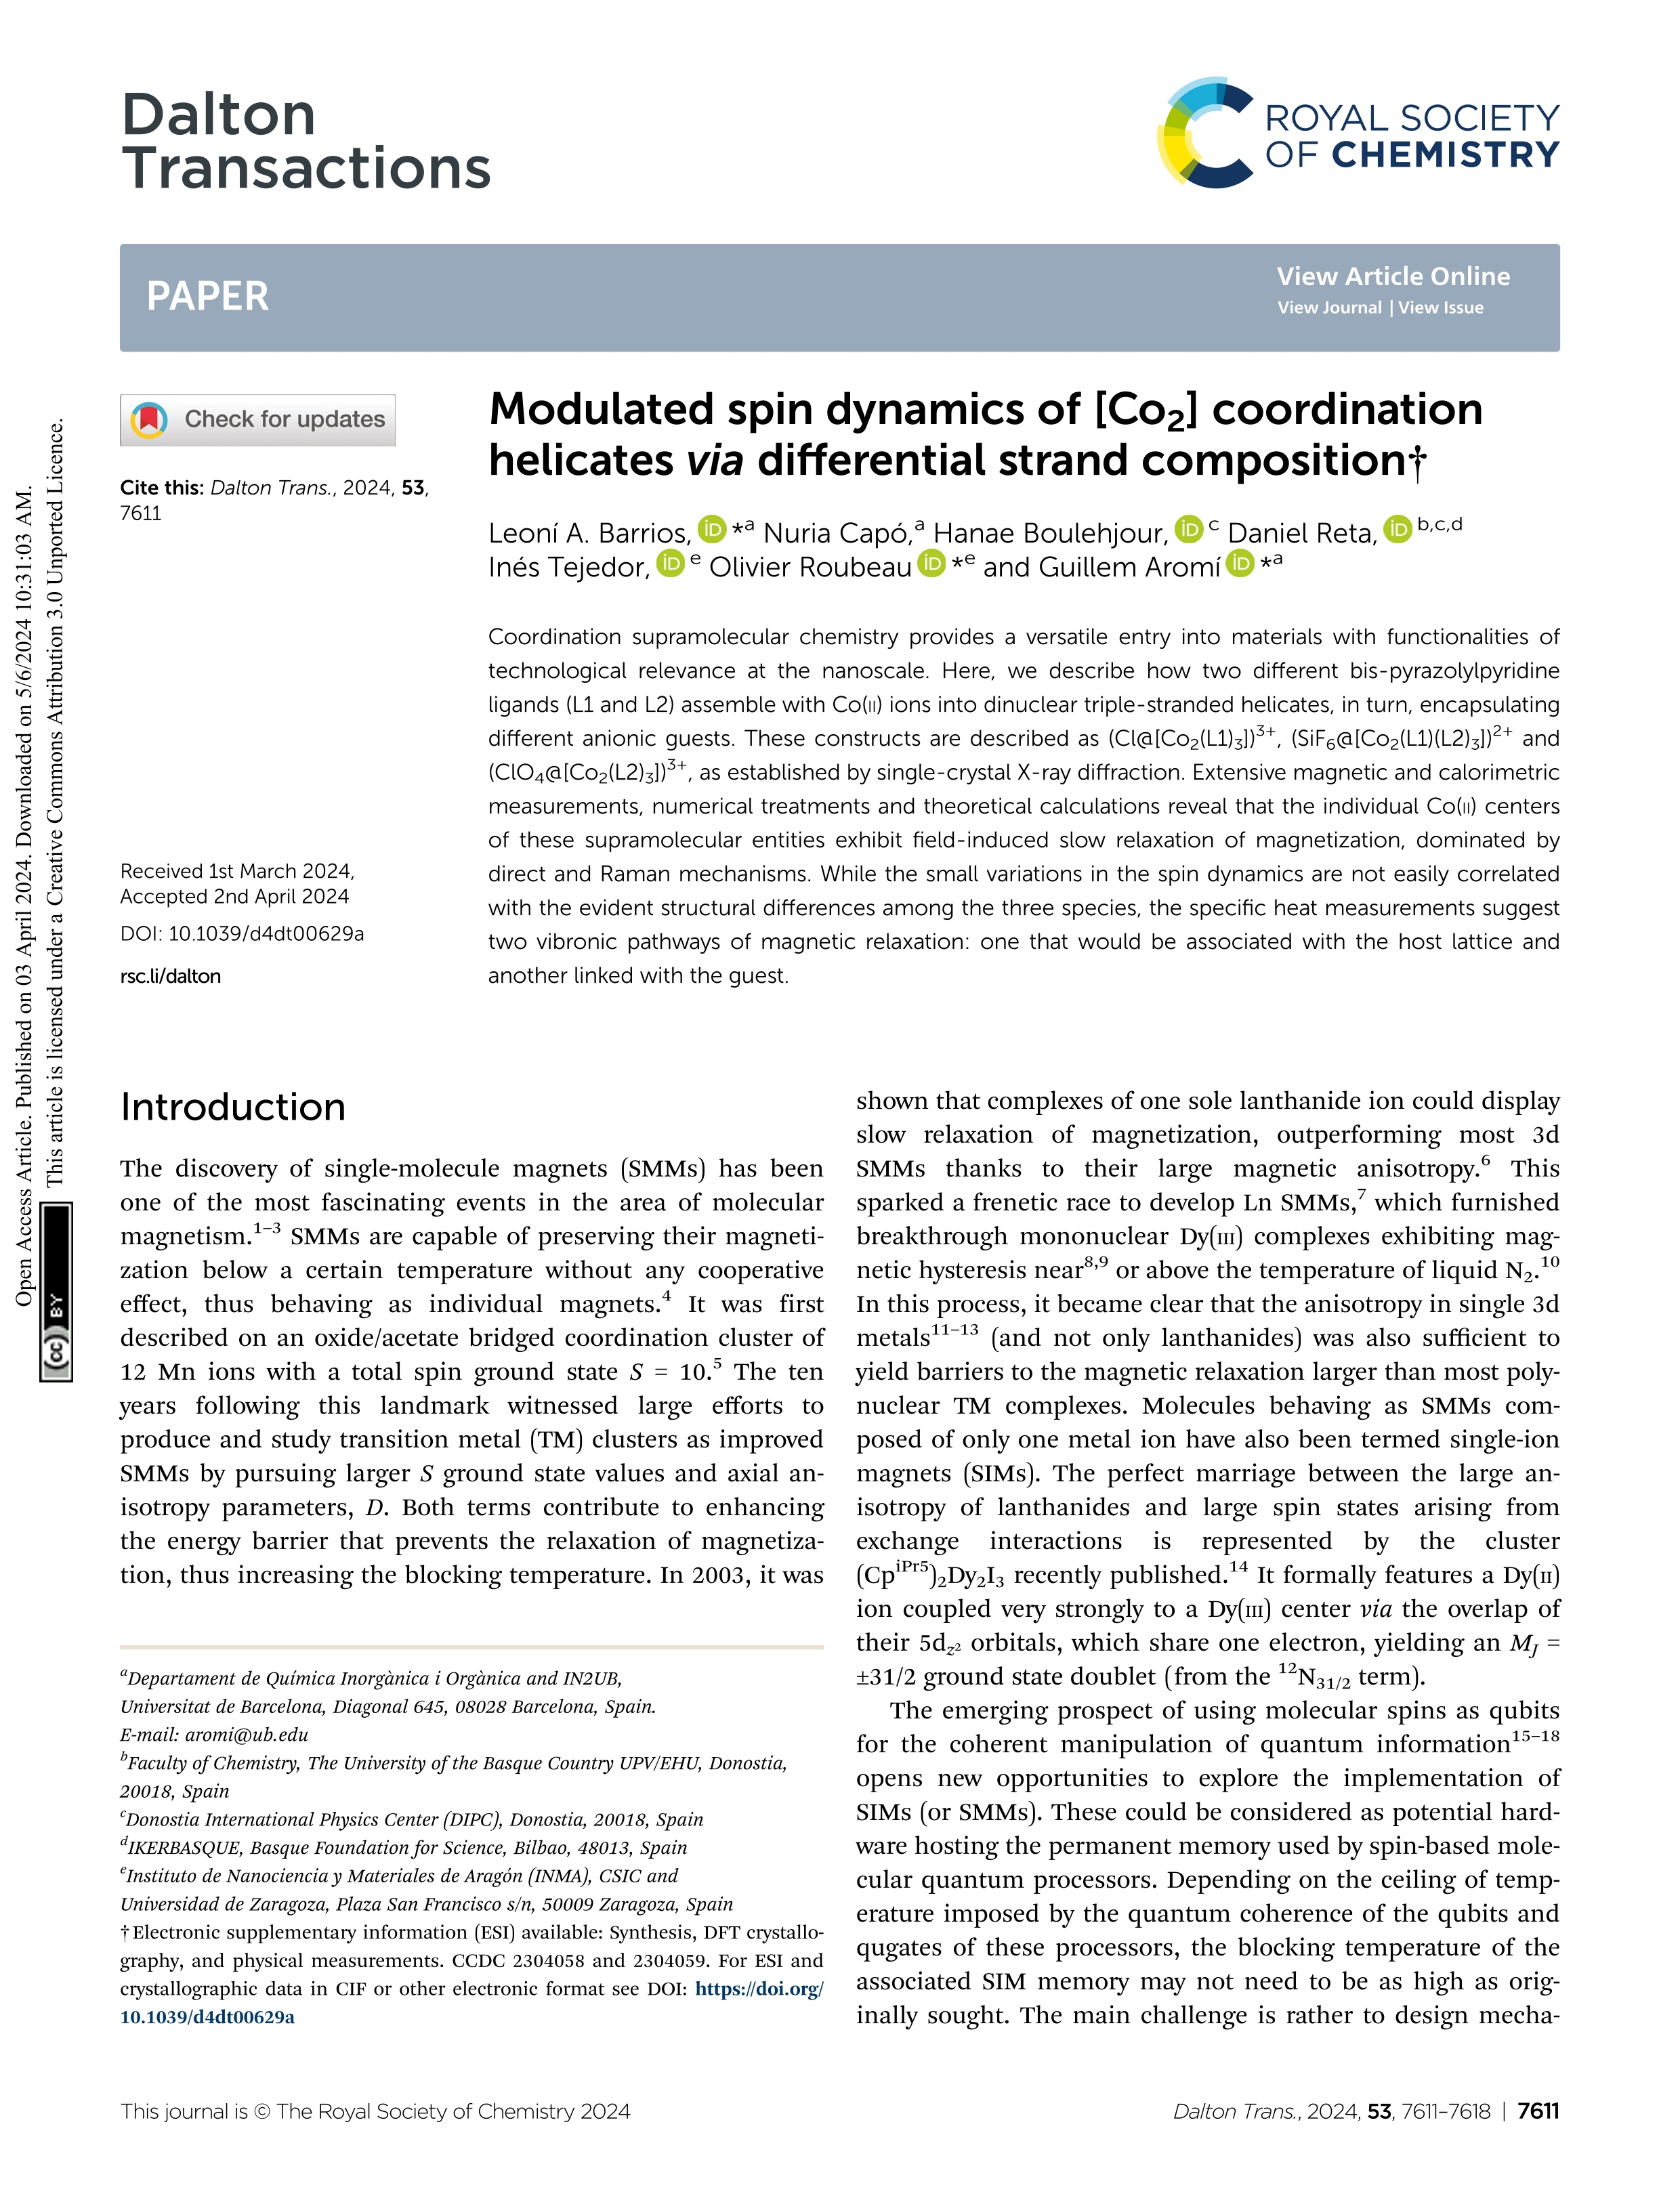 Modulated spin dynamics of [Co<sub>2</sub>] coordination helicates <i>via</i> differential strand composition